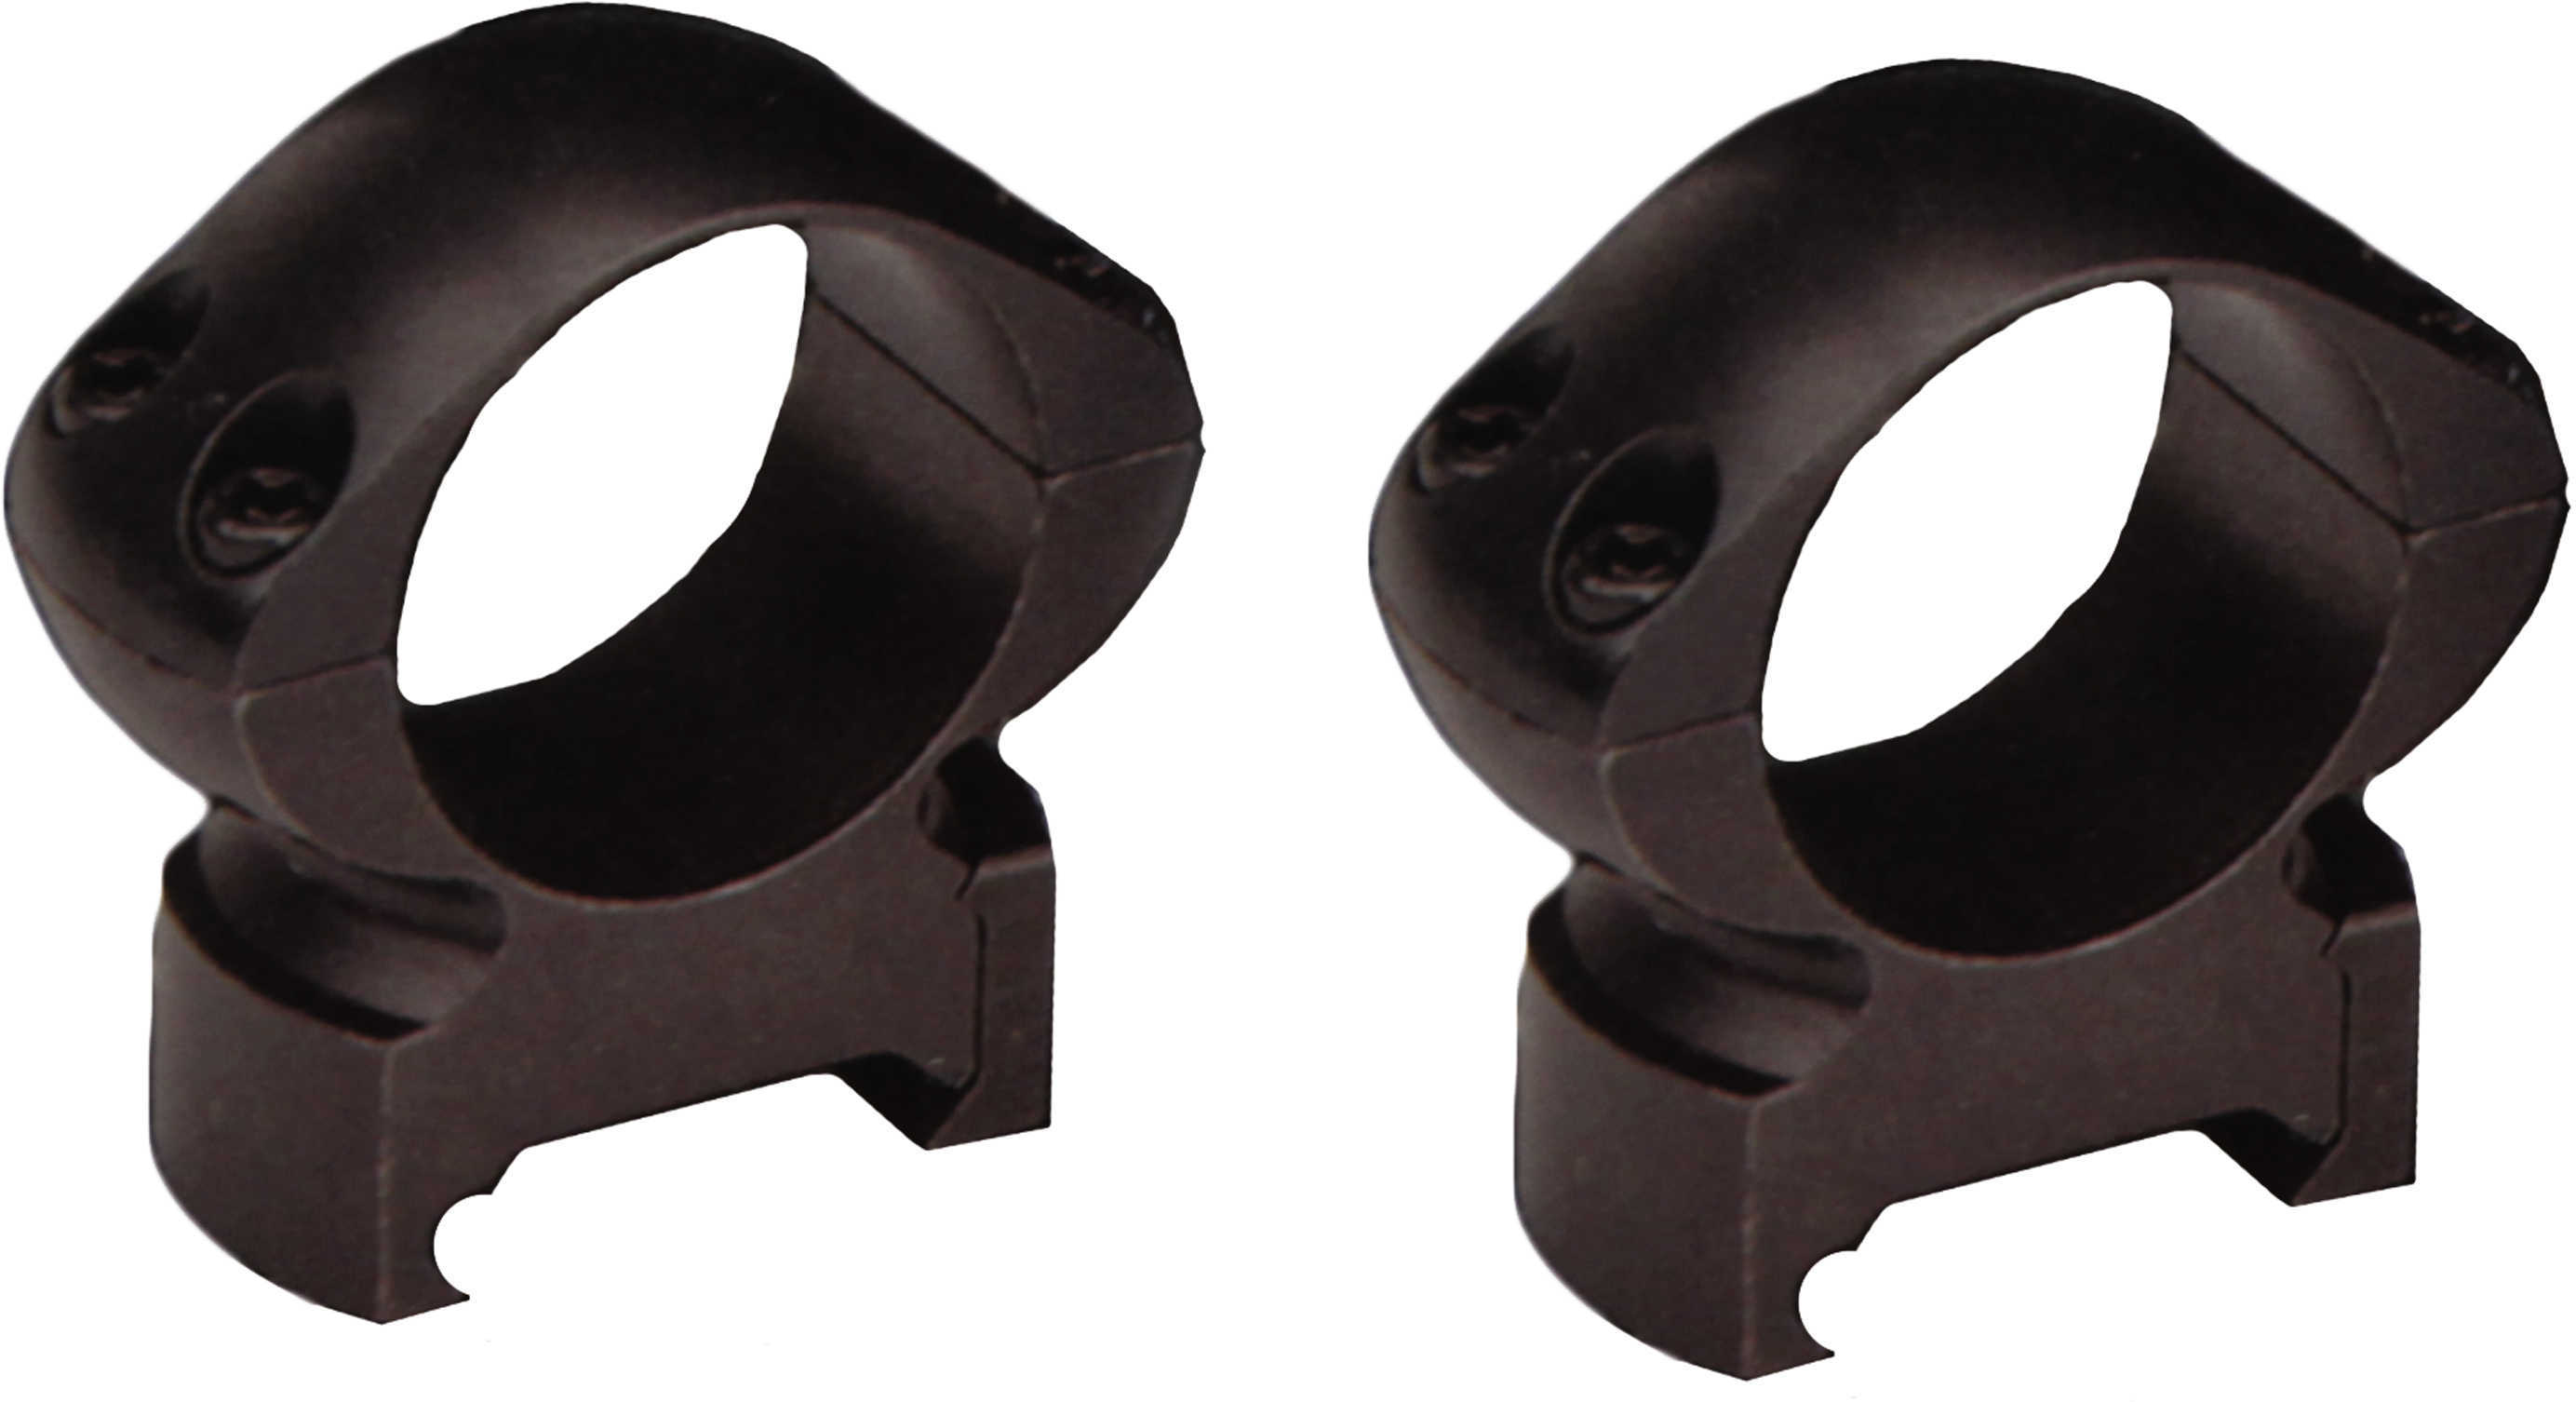 Simmons Weaver 1" Extra High Grandslam Rings With Matte Black Finish Md: 49307